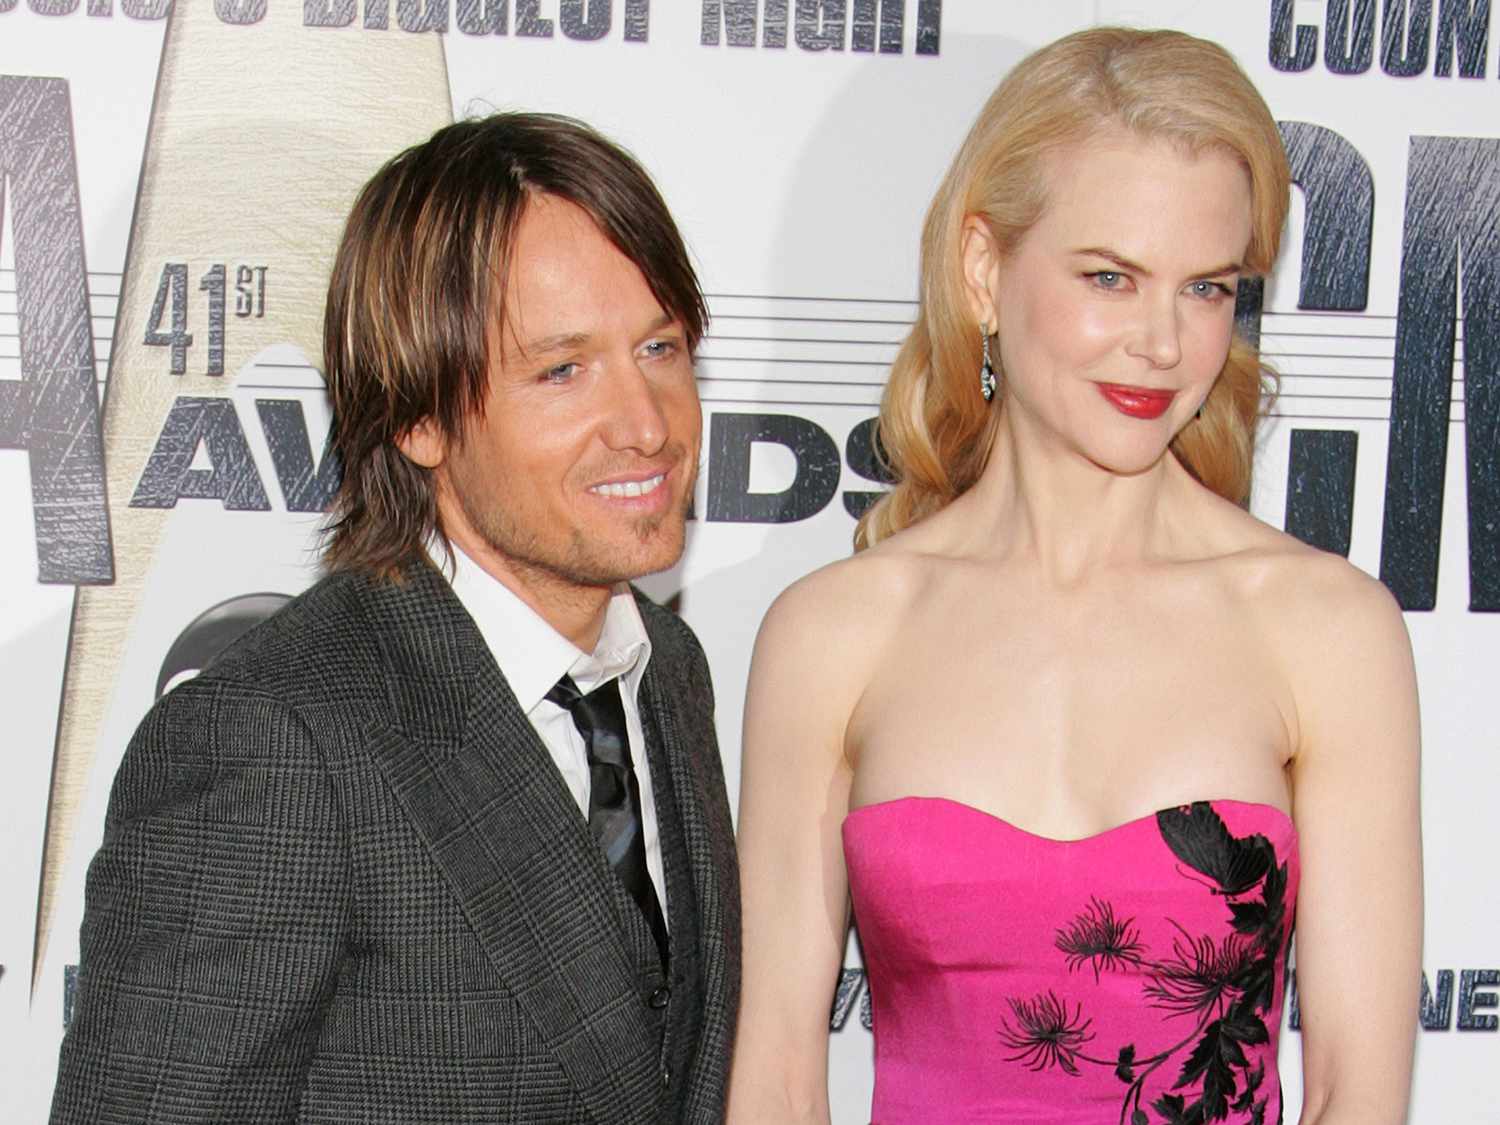 Keith Urban and his wife Nicole Kidman arrive at the Sommet Center on November 7, 2007 in Nashville, Tennessee